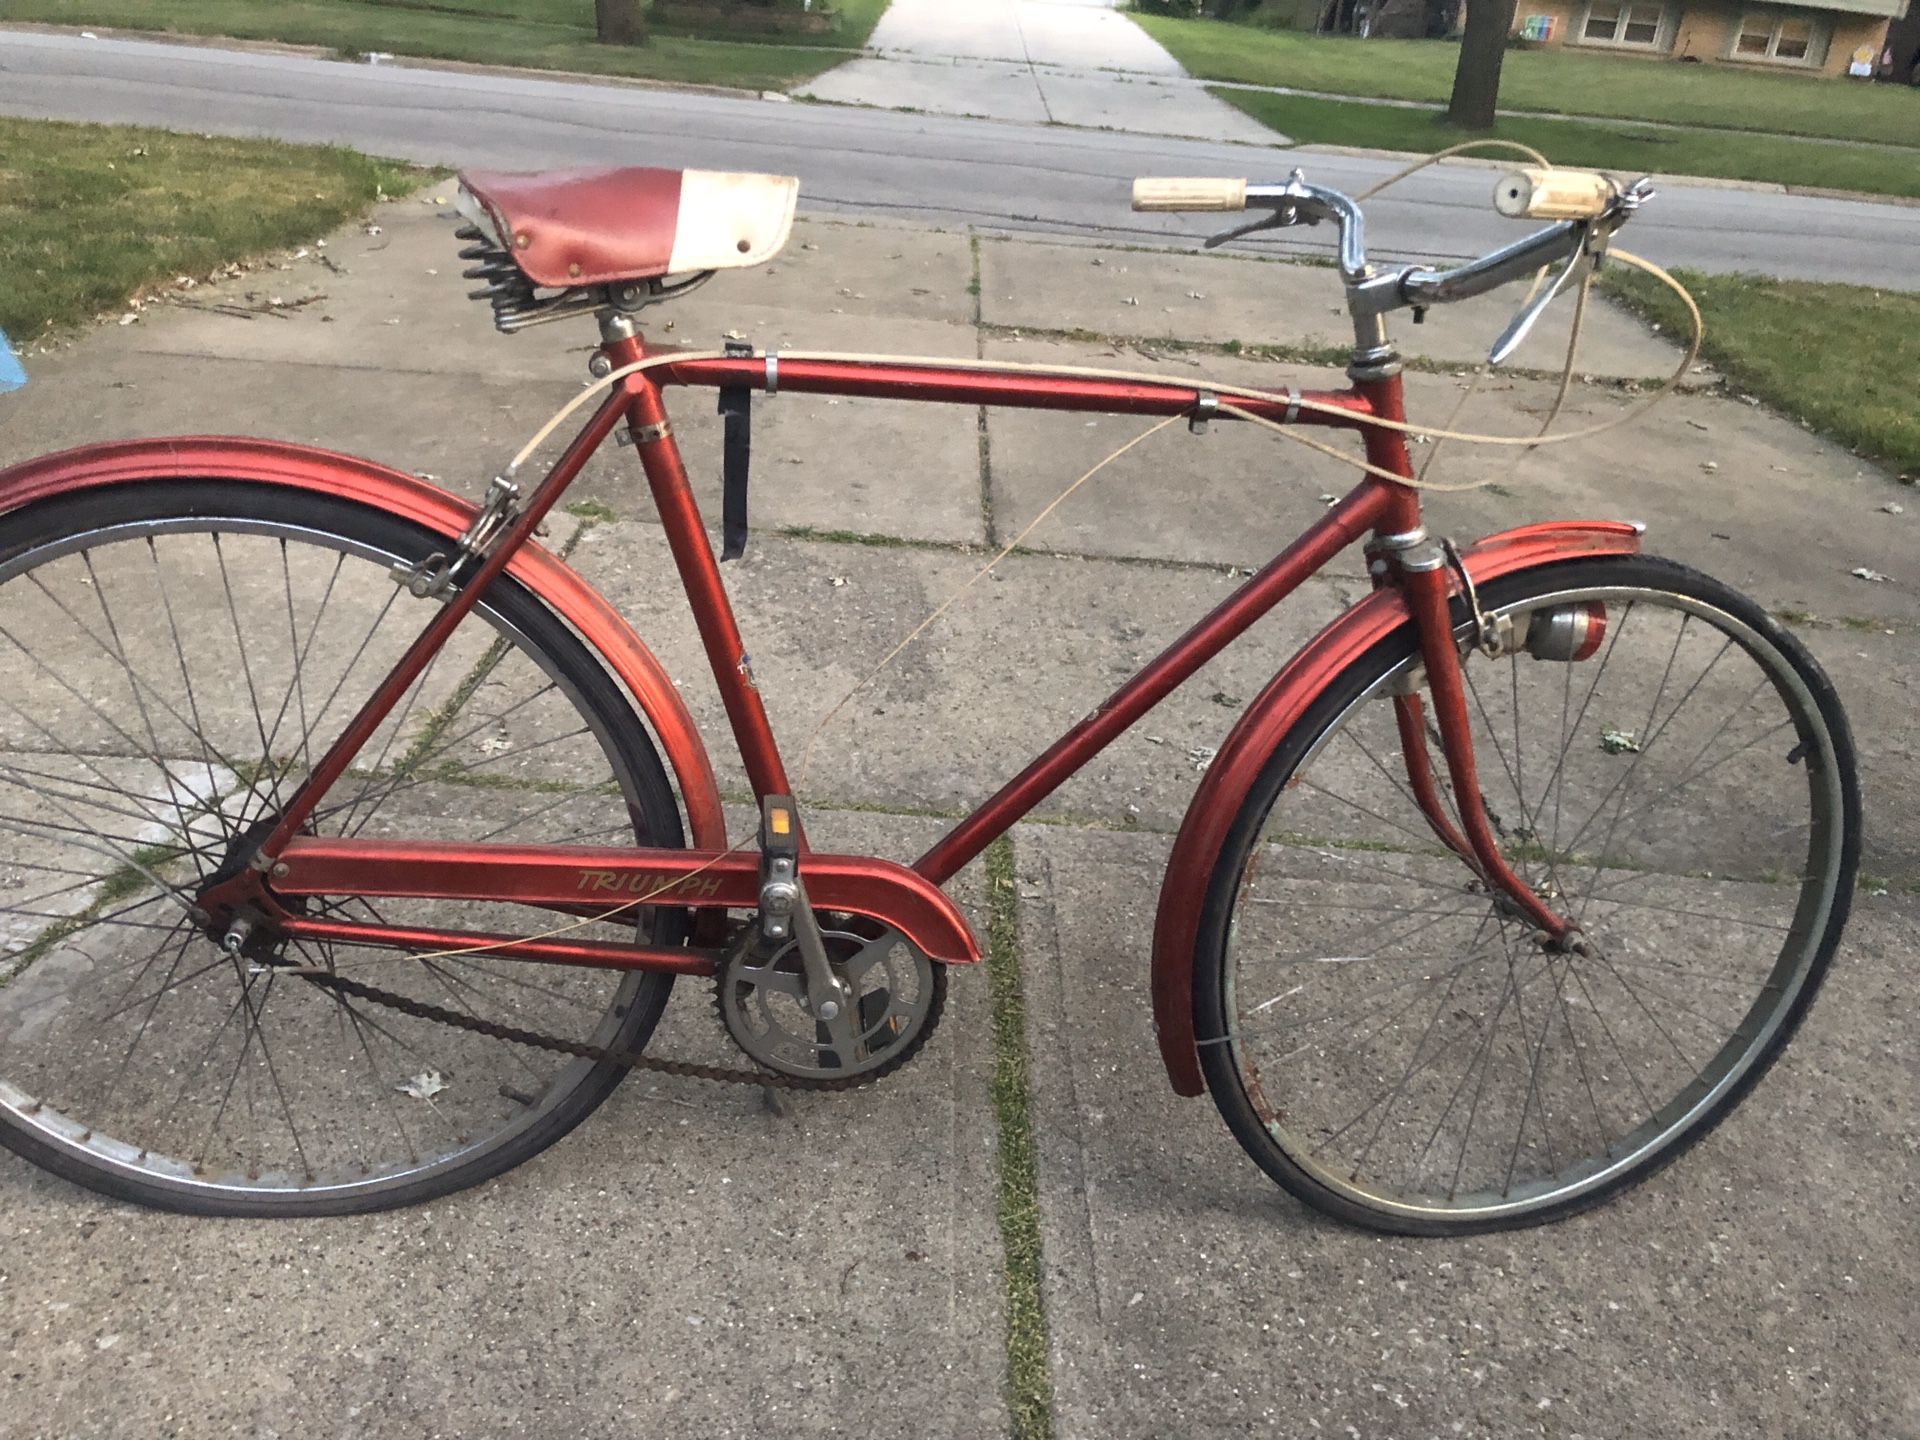 Vintage triumph Bicycle made in England good shape $225obo